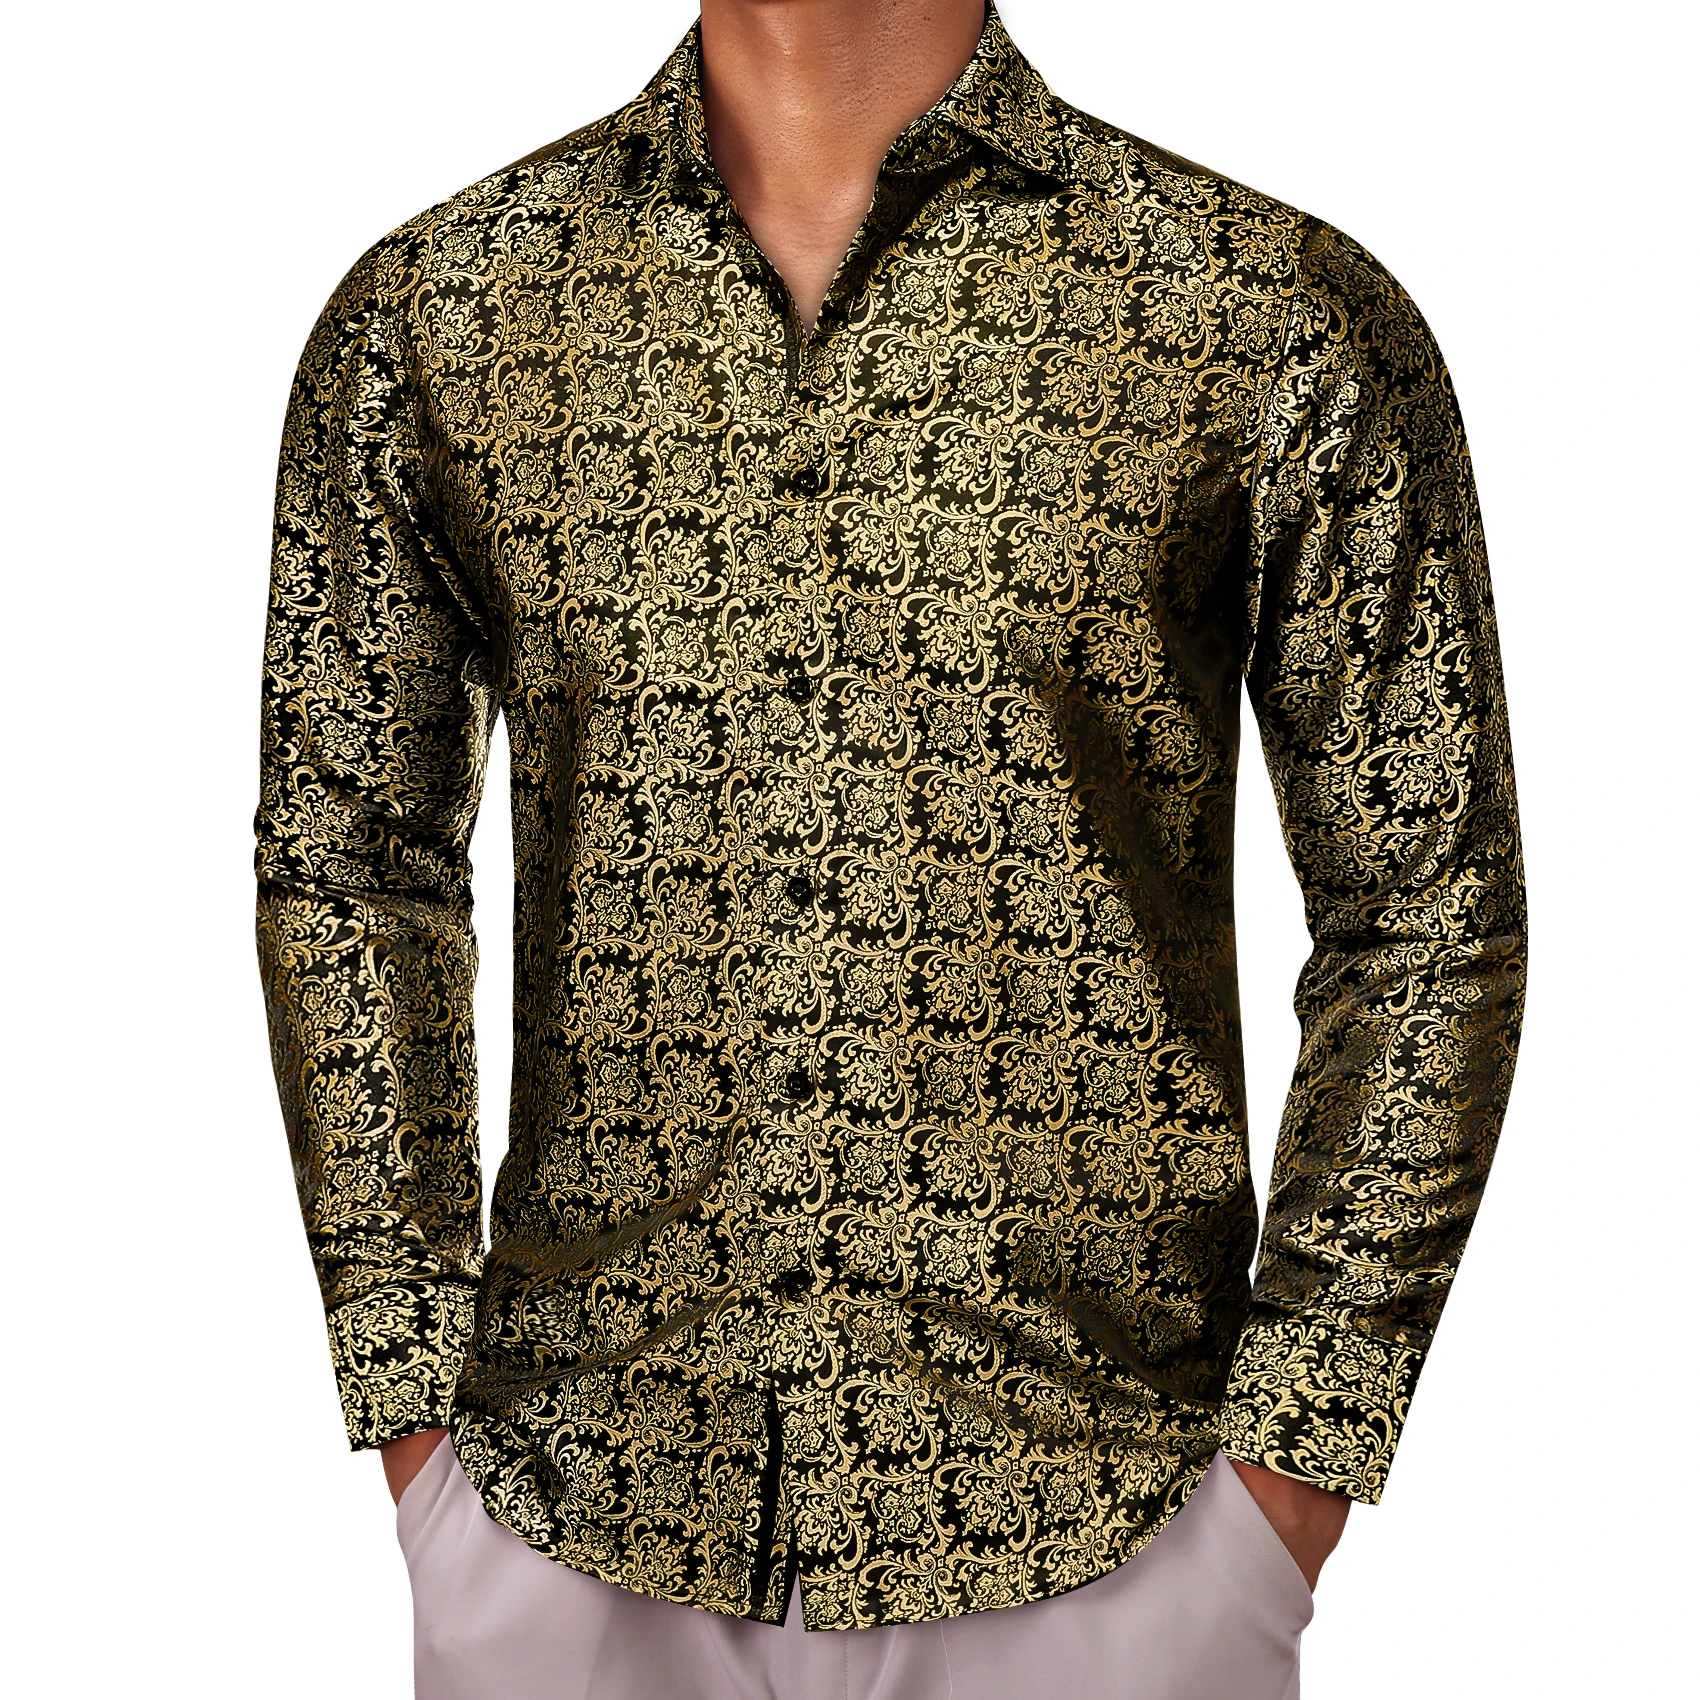 Designer Shirts for Men Silk Long Sleeve Gold Black Flower Slim Fit Male Blouses Casual Formal Tops Breathable Barry Wang